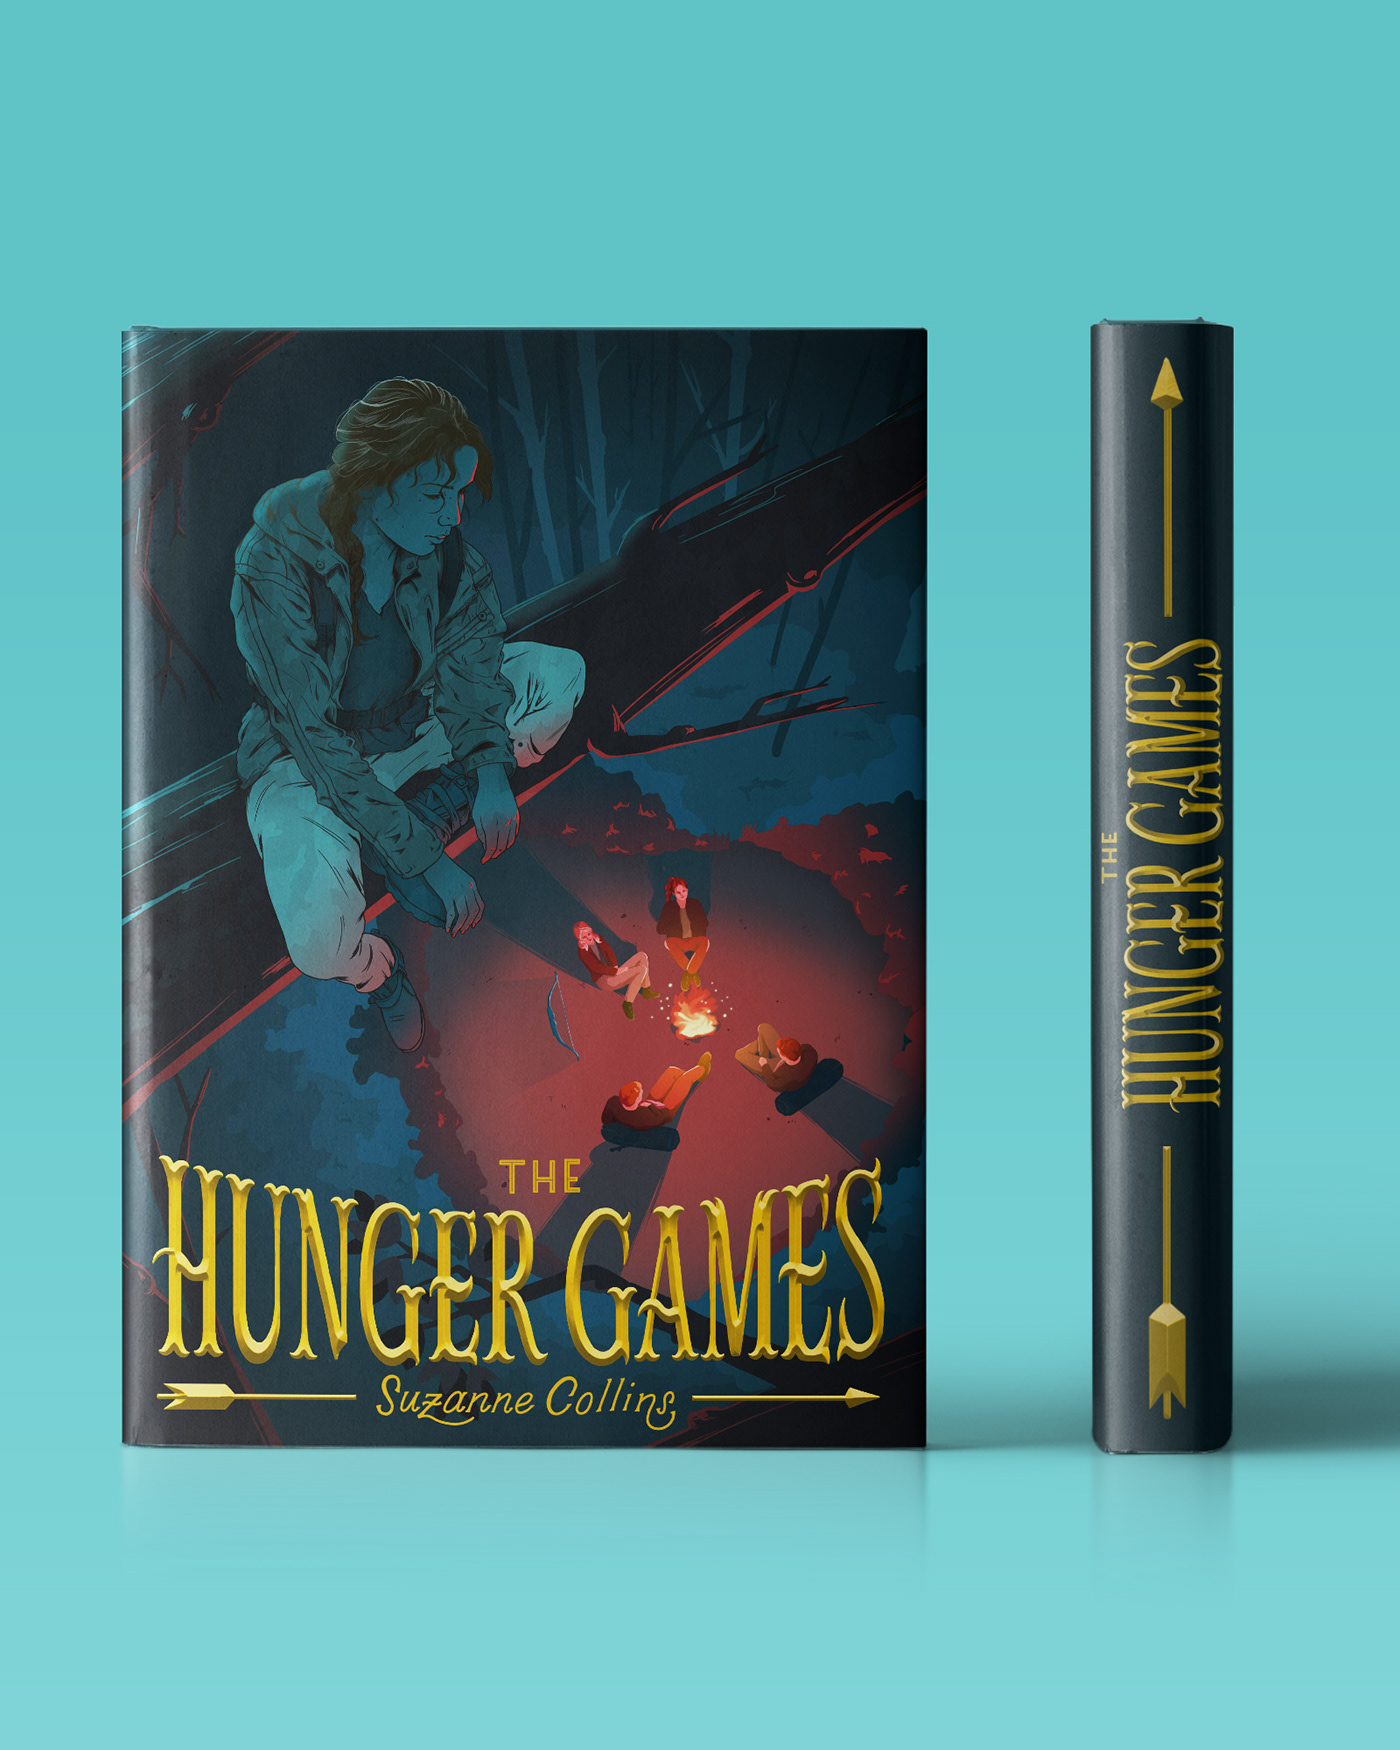 book cover book cover illustration Hunger Games jennifer lawrence Book Cover Design typography   lettering ILLUSTRATION  the hunger games book cover concept